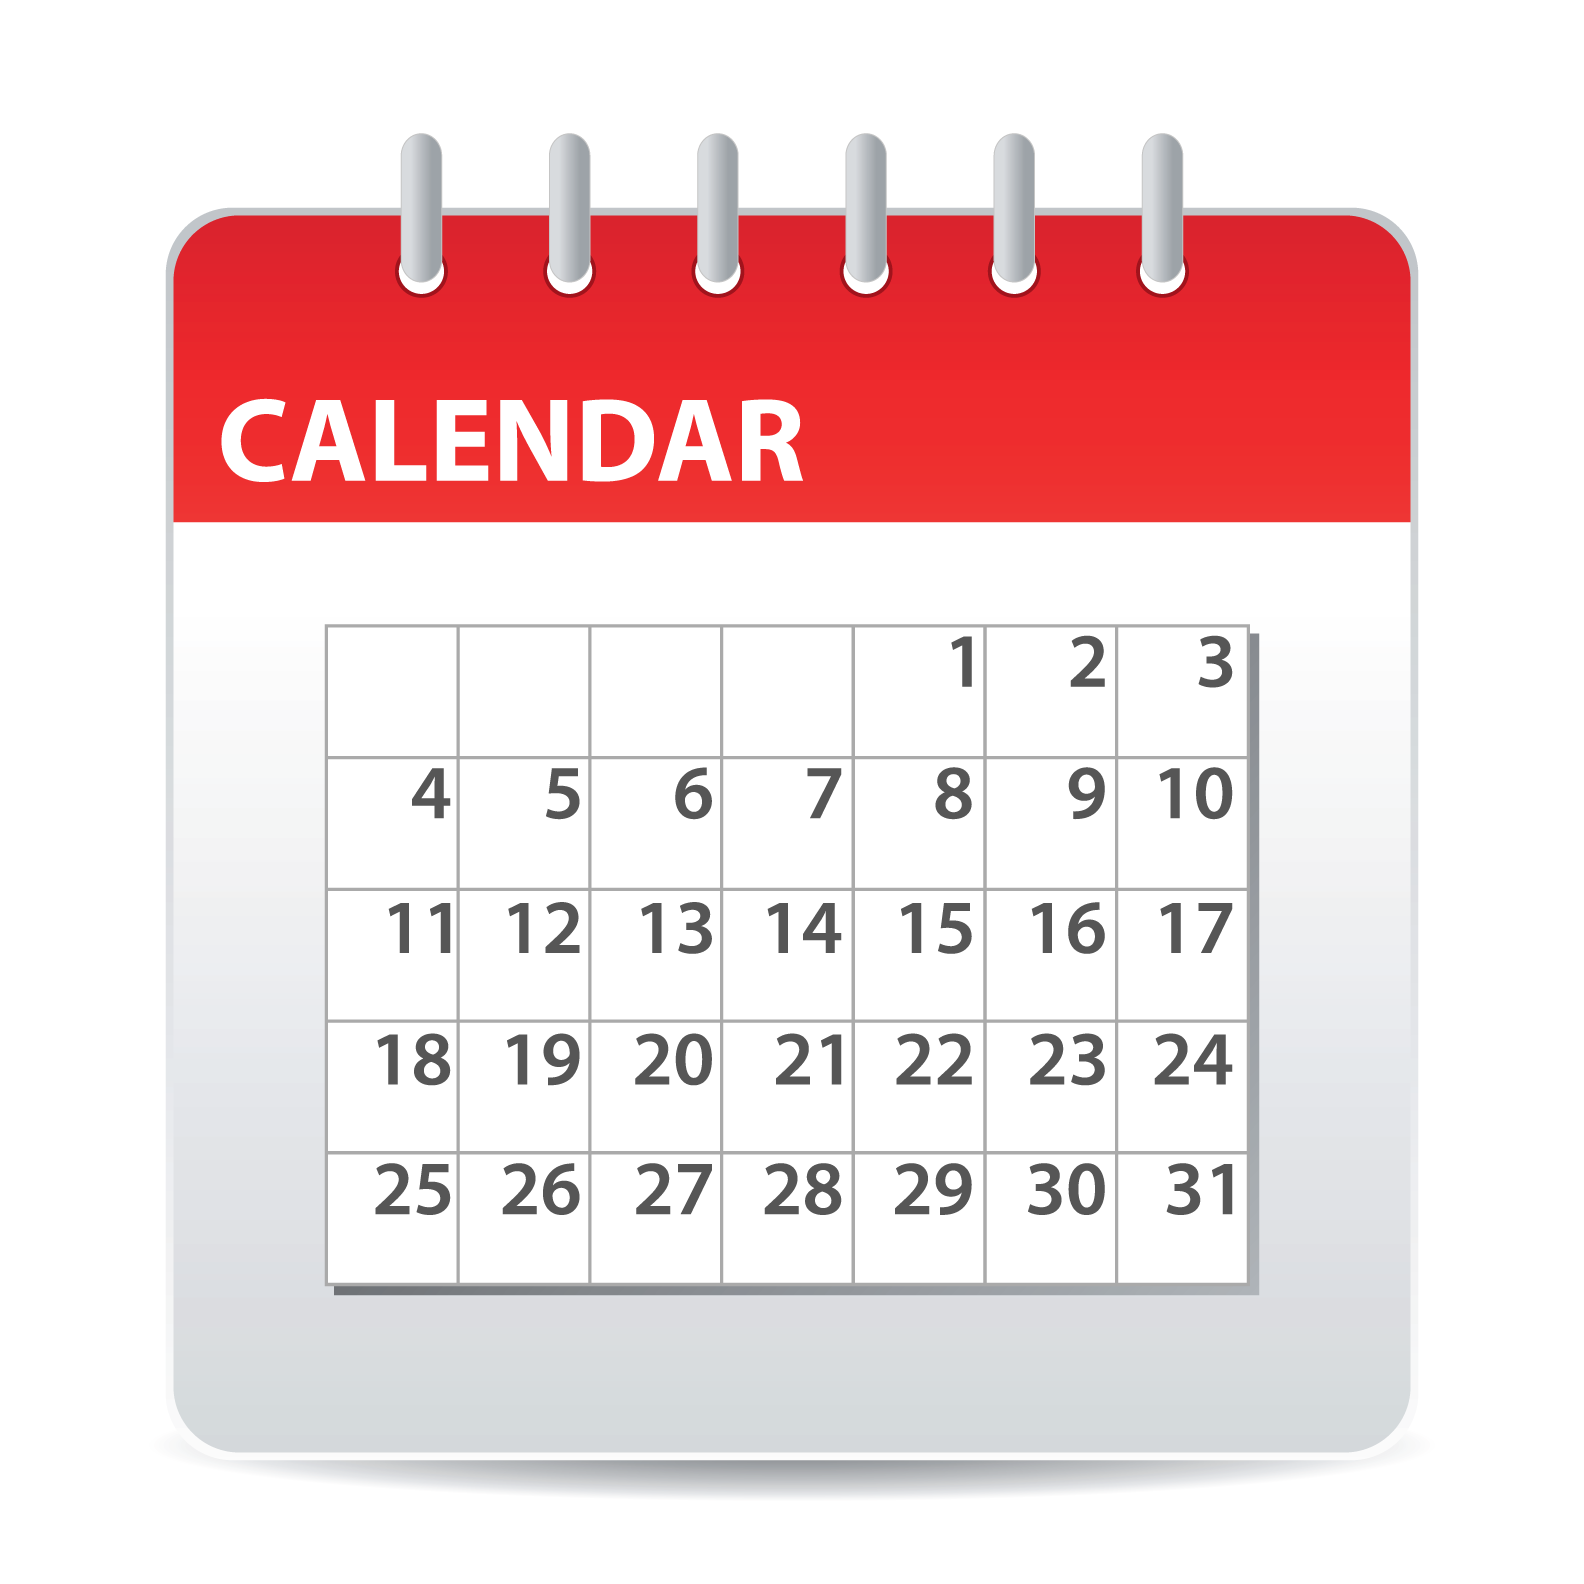 Calendar PNG Image PNG All PNG All